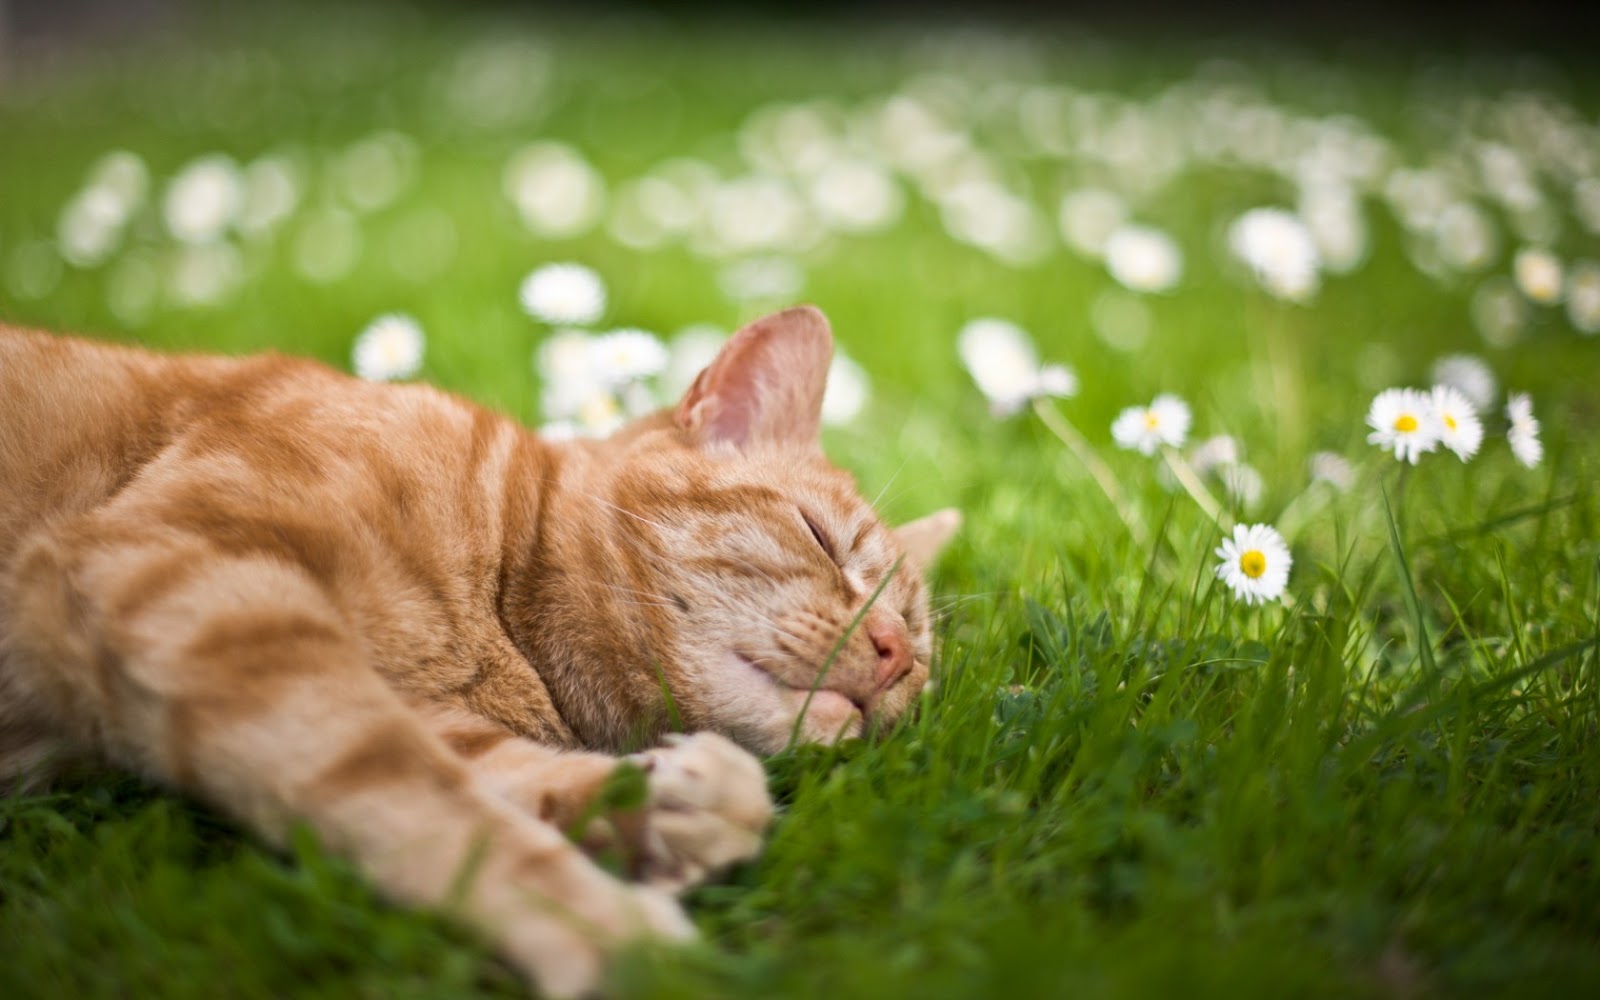 cat pic wallpaper,cat,small to medium sized cats,felidae,grass,nature